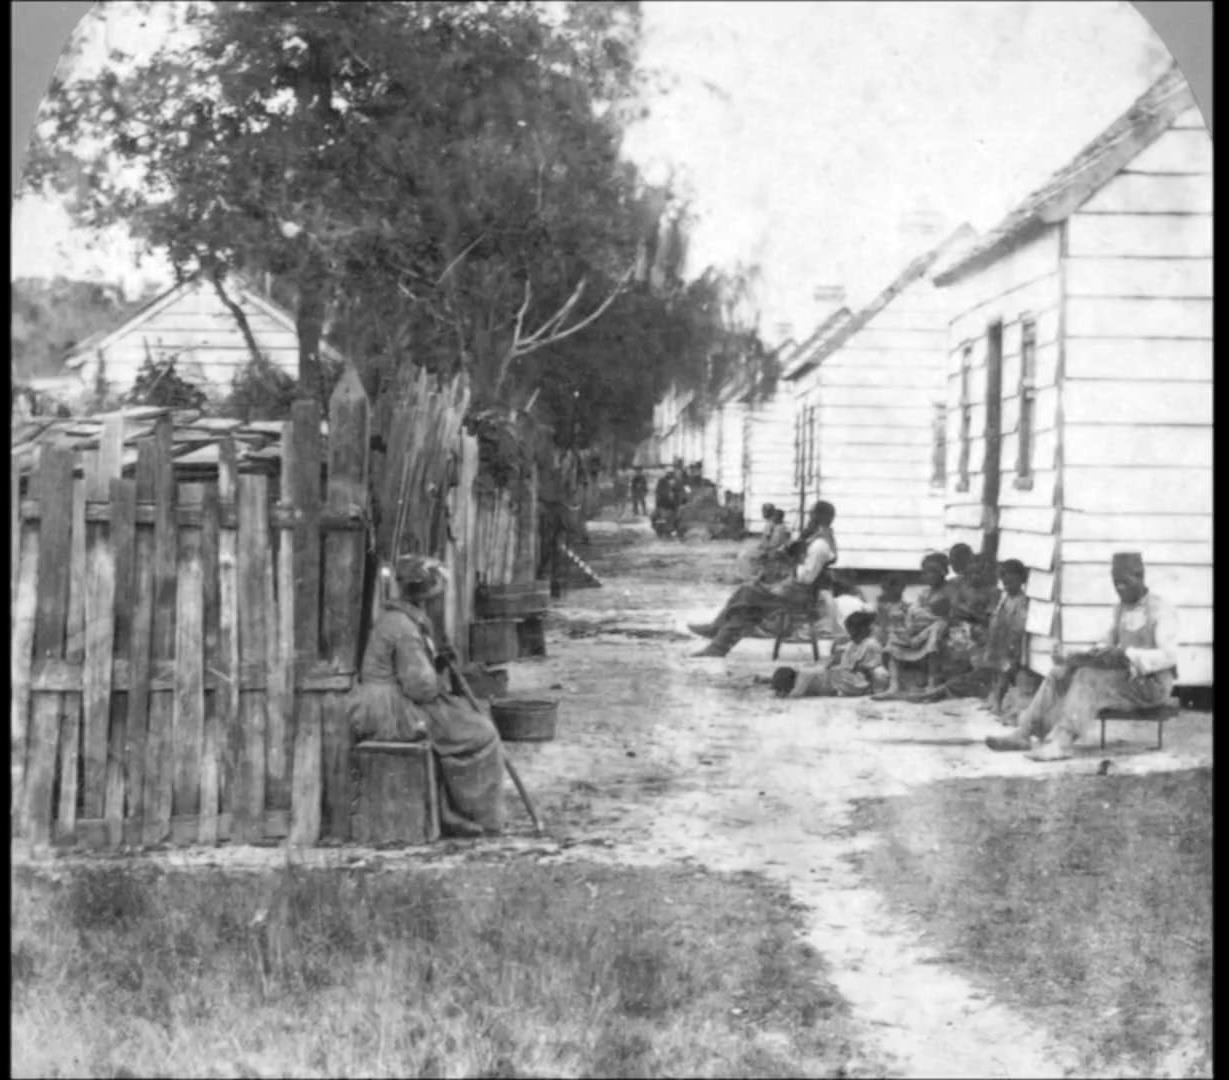 Rare Photos of Slaves in South Carolina From the 1850s1860s_05